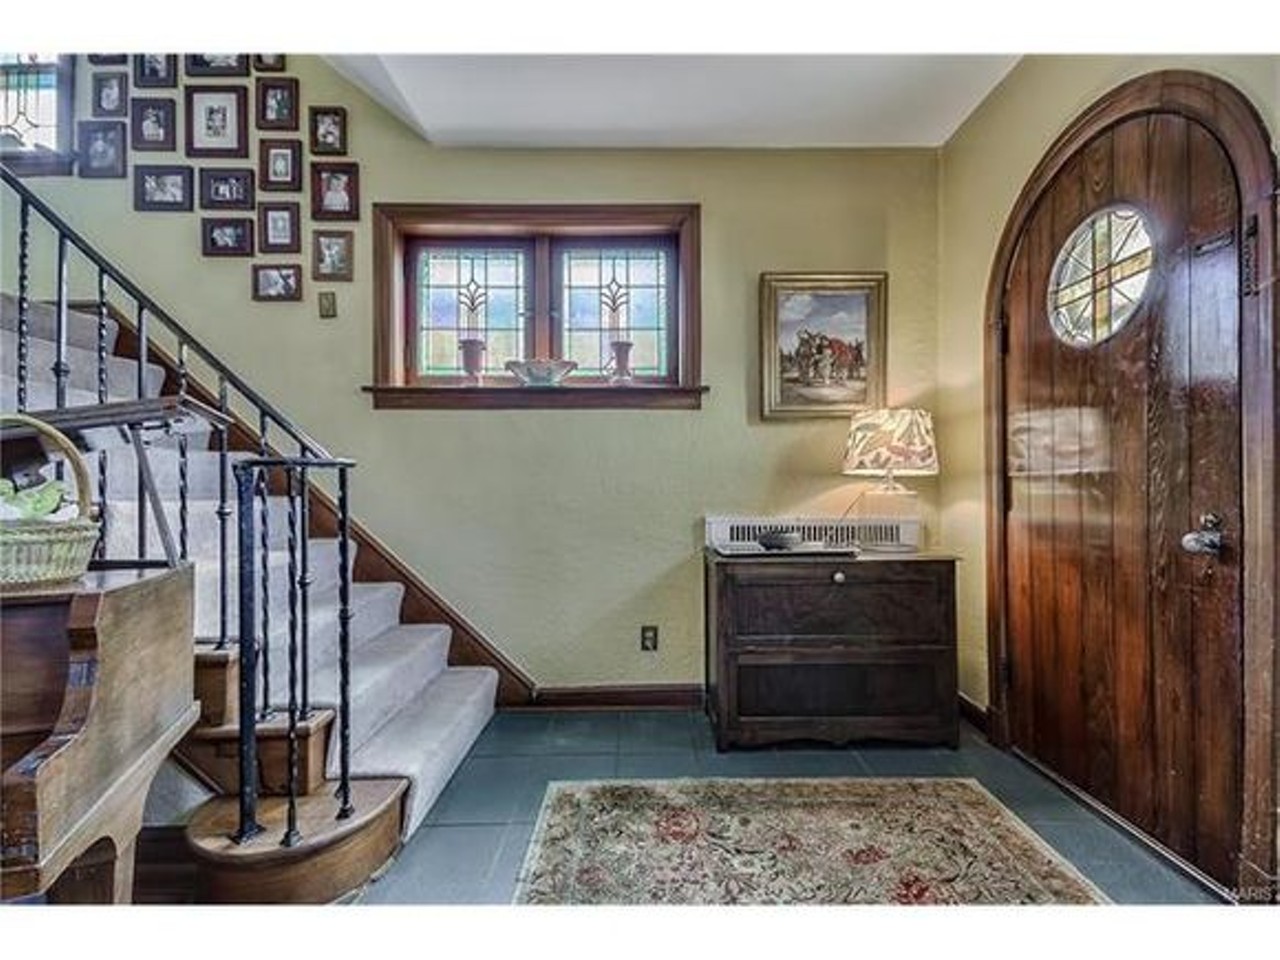 The cozy foyer will make you feel right at home.